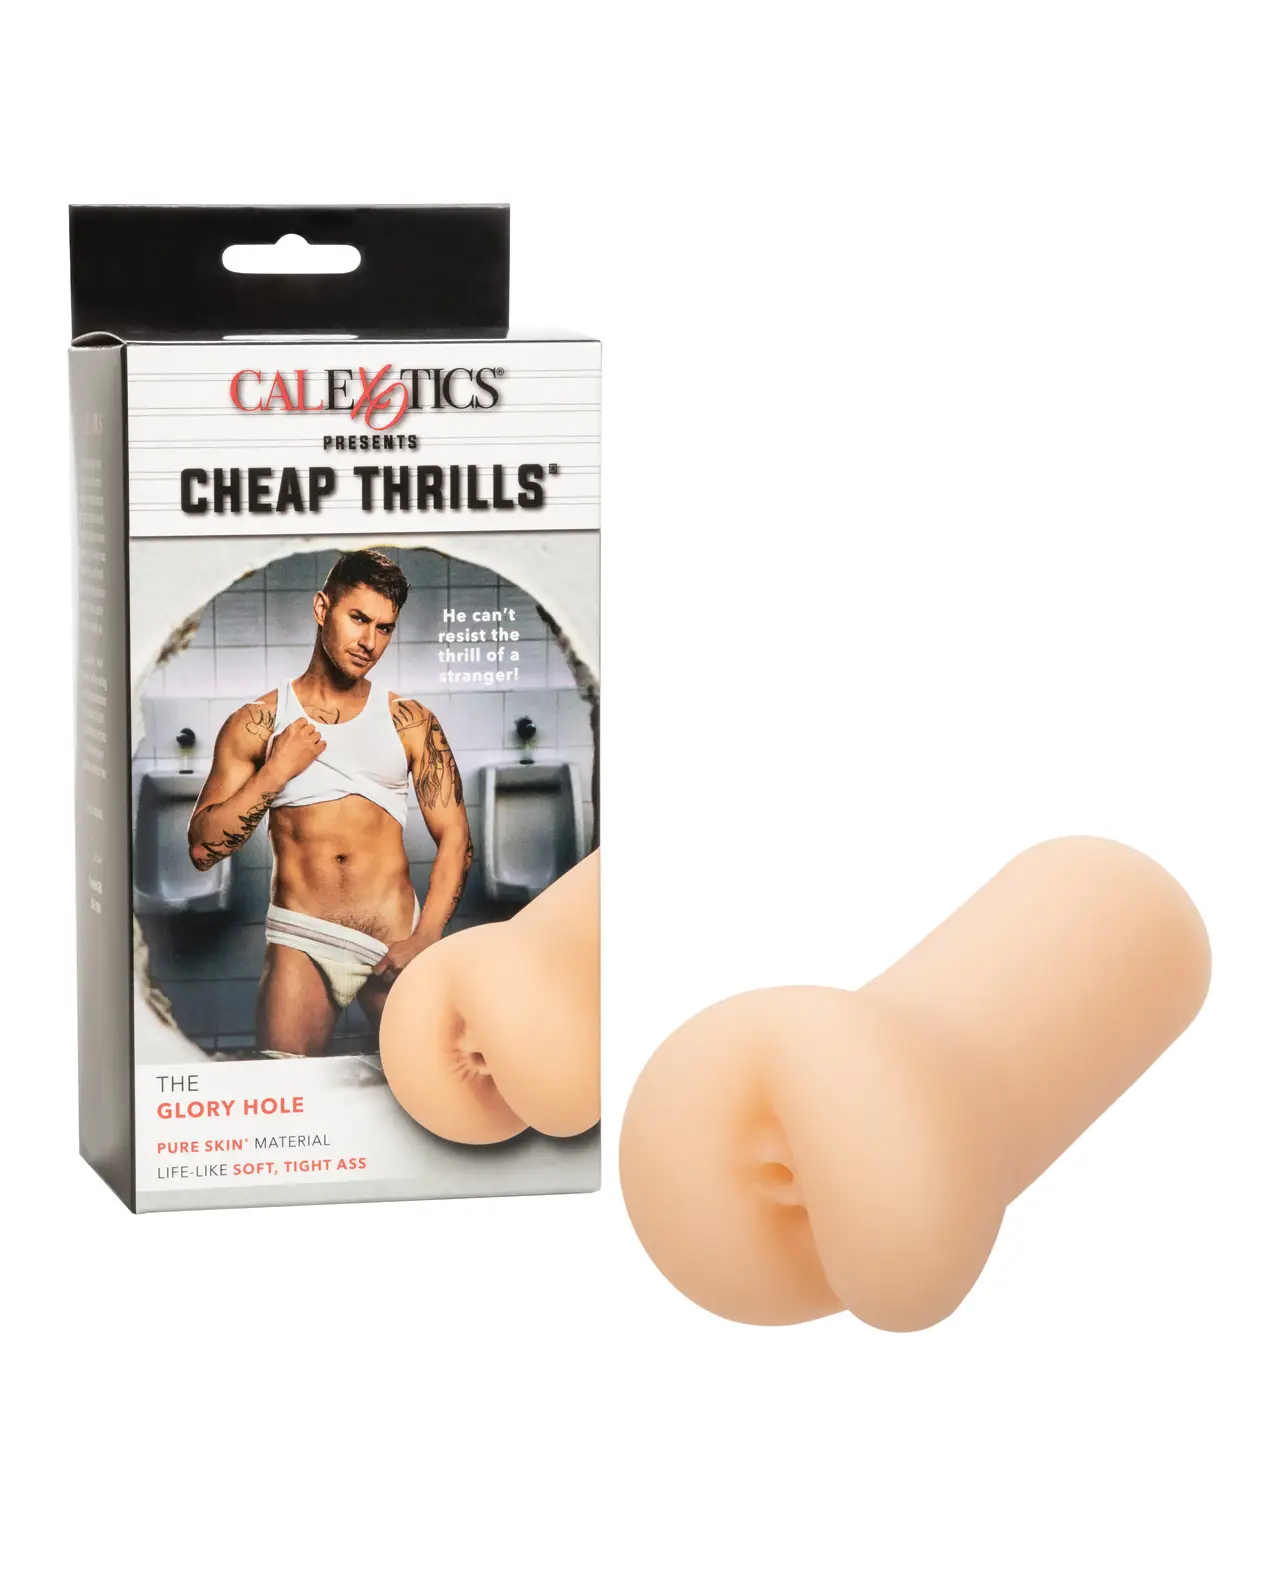 on the box is a Man with underwear. In front of the box is the cream colored masturbator shaped like an anus